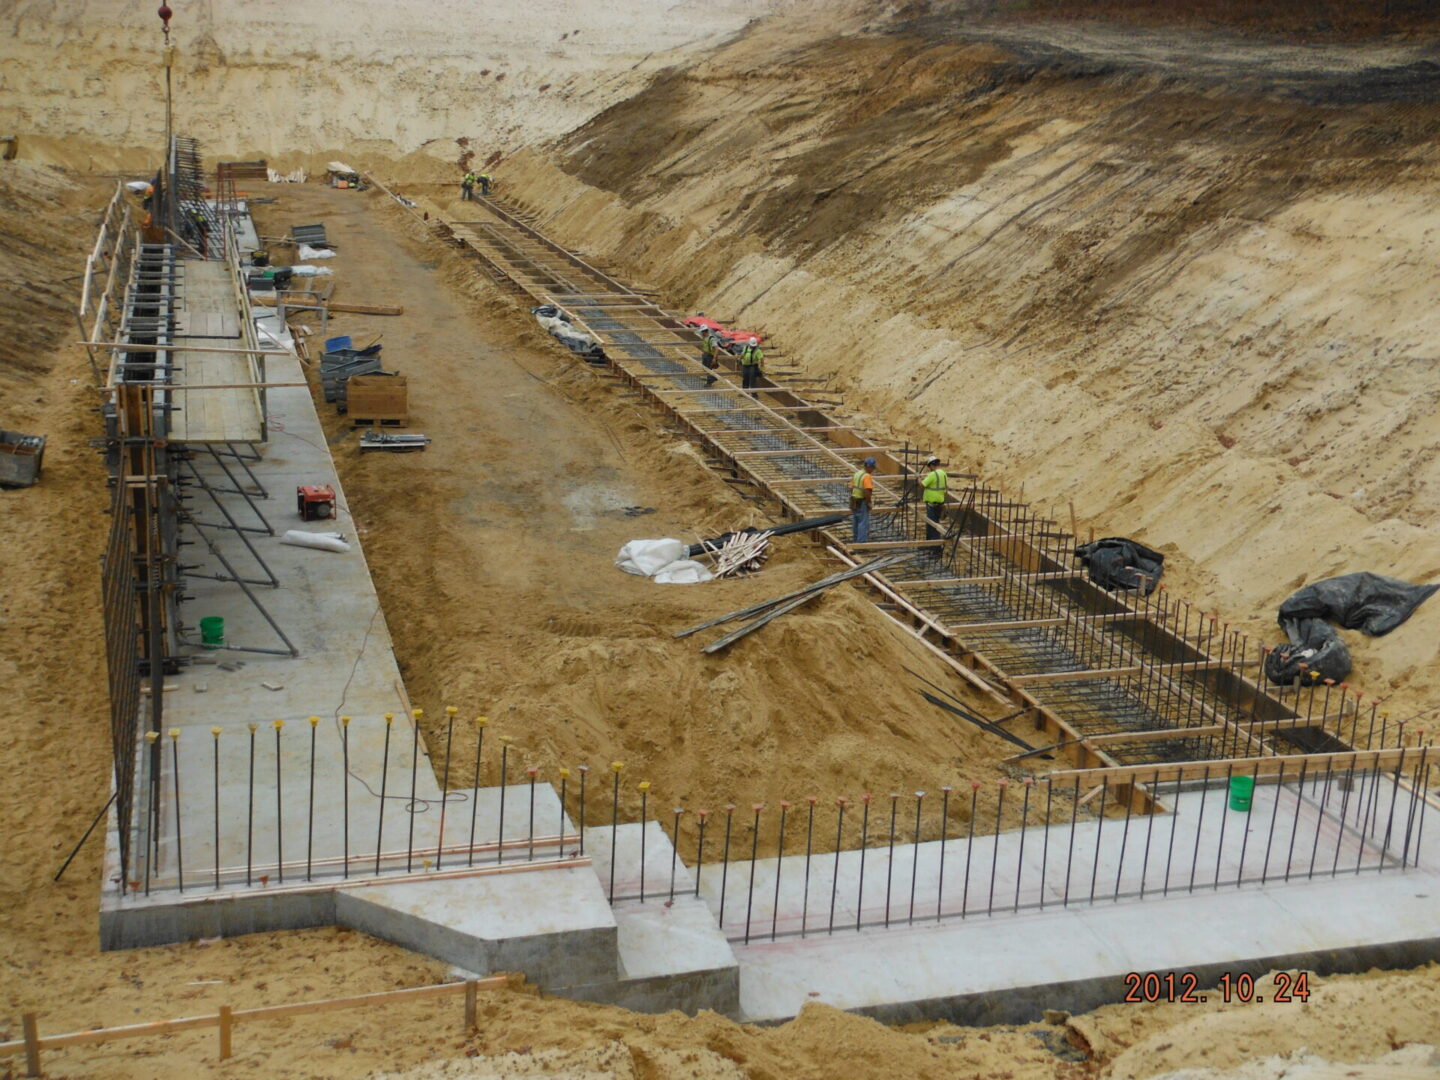 Construction workers laying the foundation at a large excavation site.